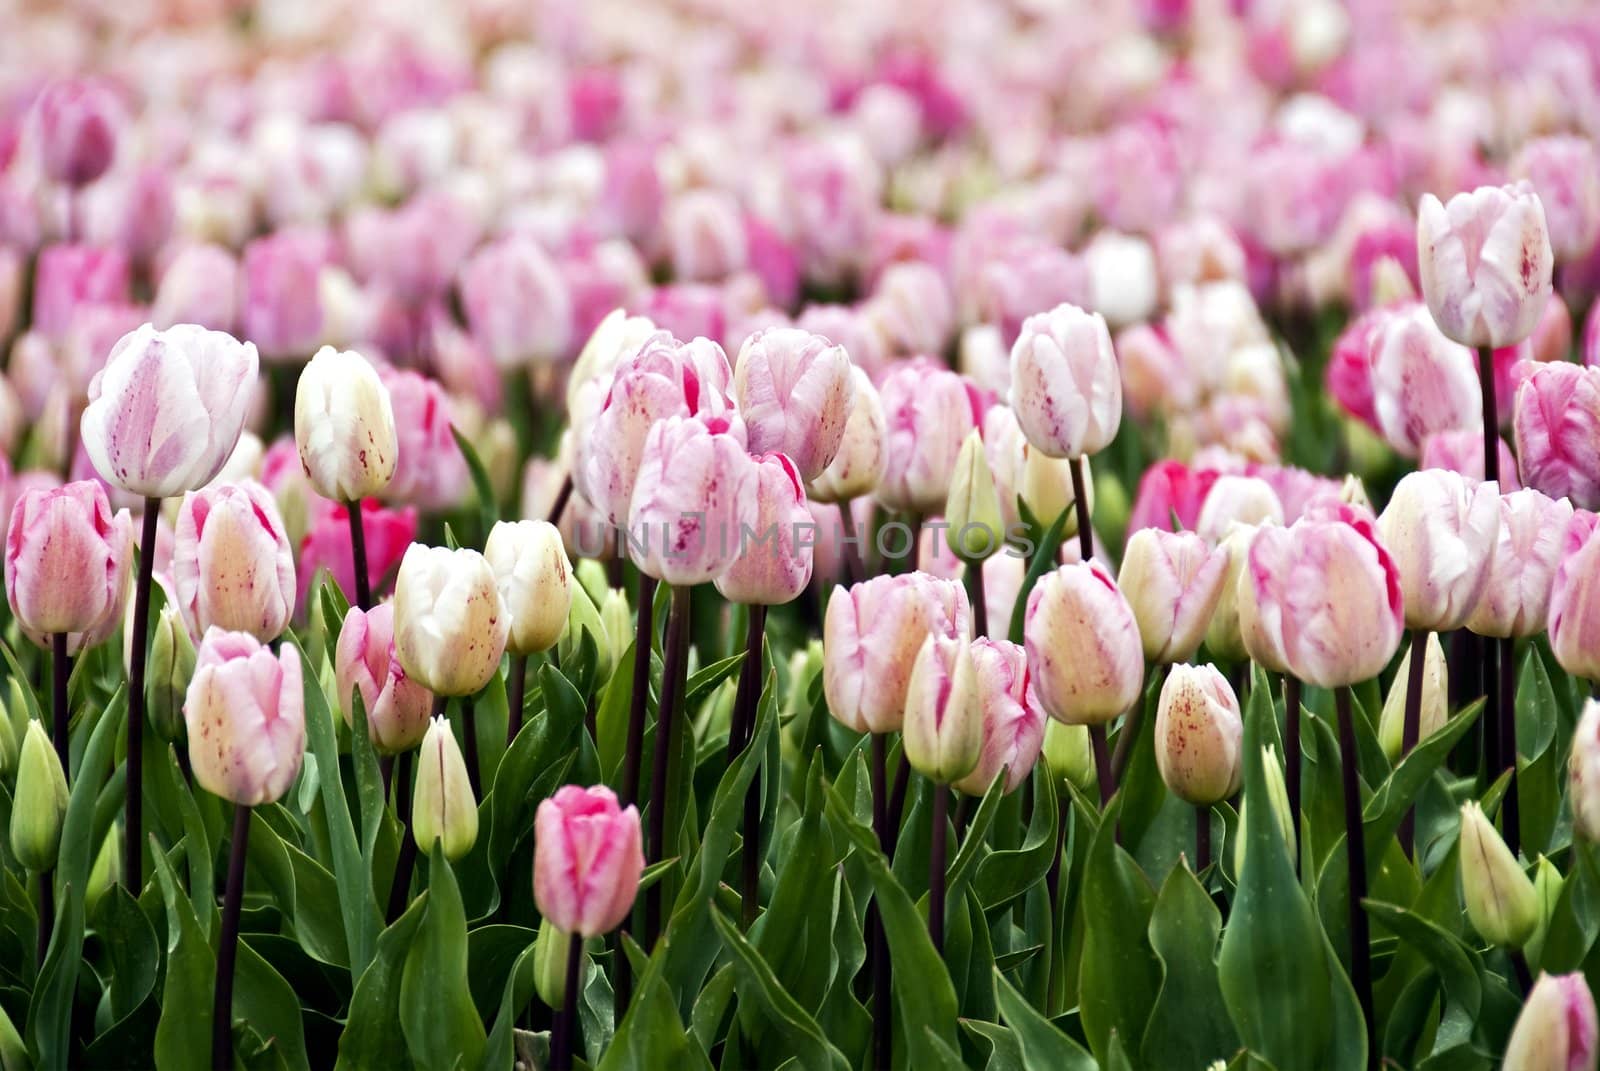 Endless field of pink to white speckled tulip flowers